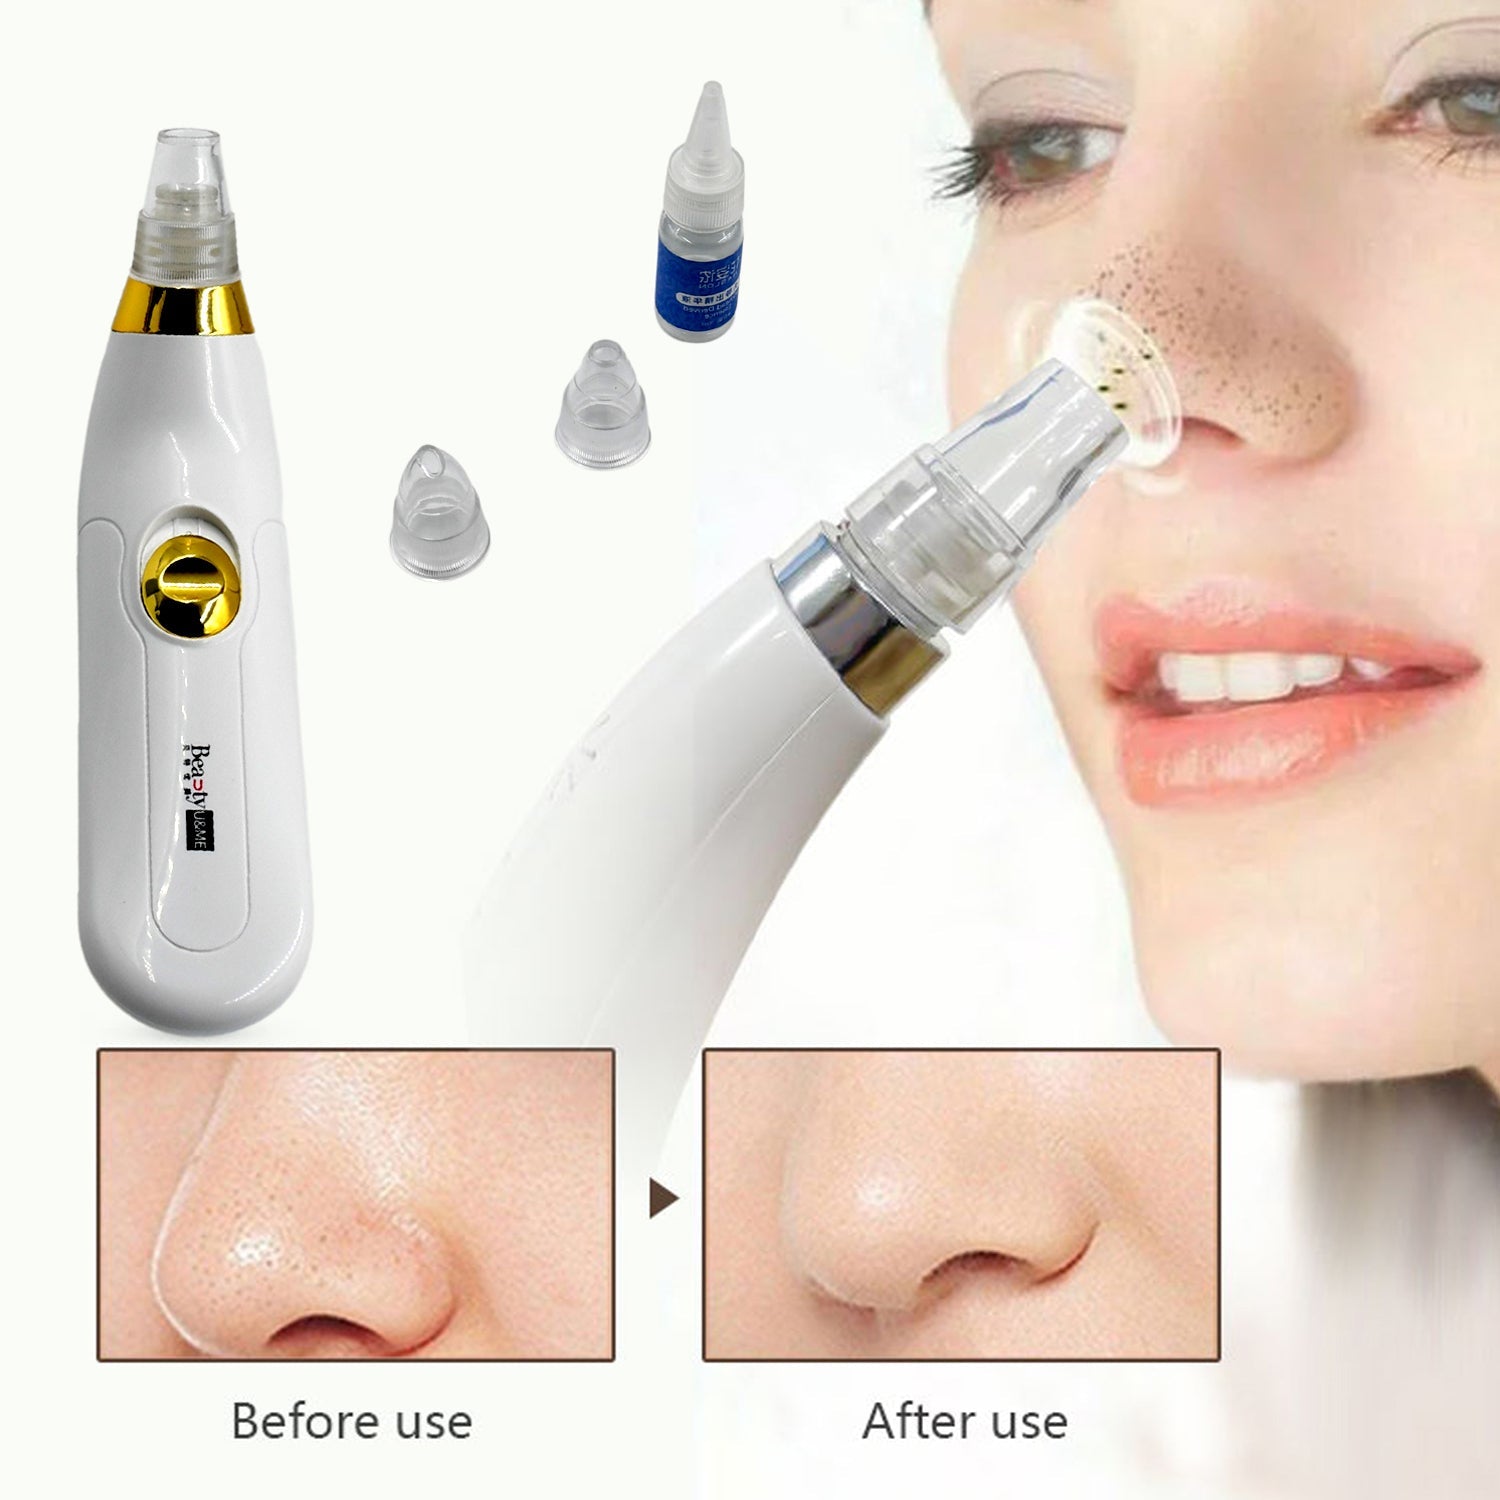 0351B Vacuum Blackhead Cleaner, 3 Suction Level Adjustable Electric Pore Cleaner Equipment With Replaceable Suction Head, For Skin Care